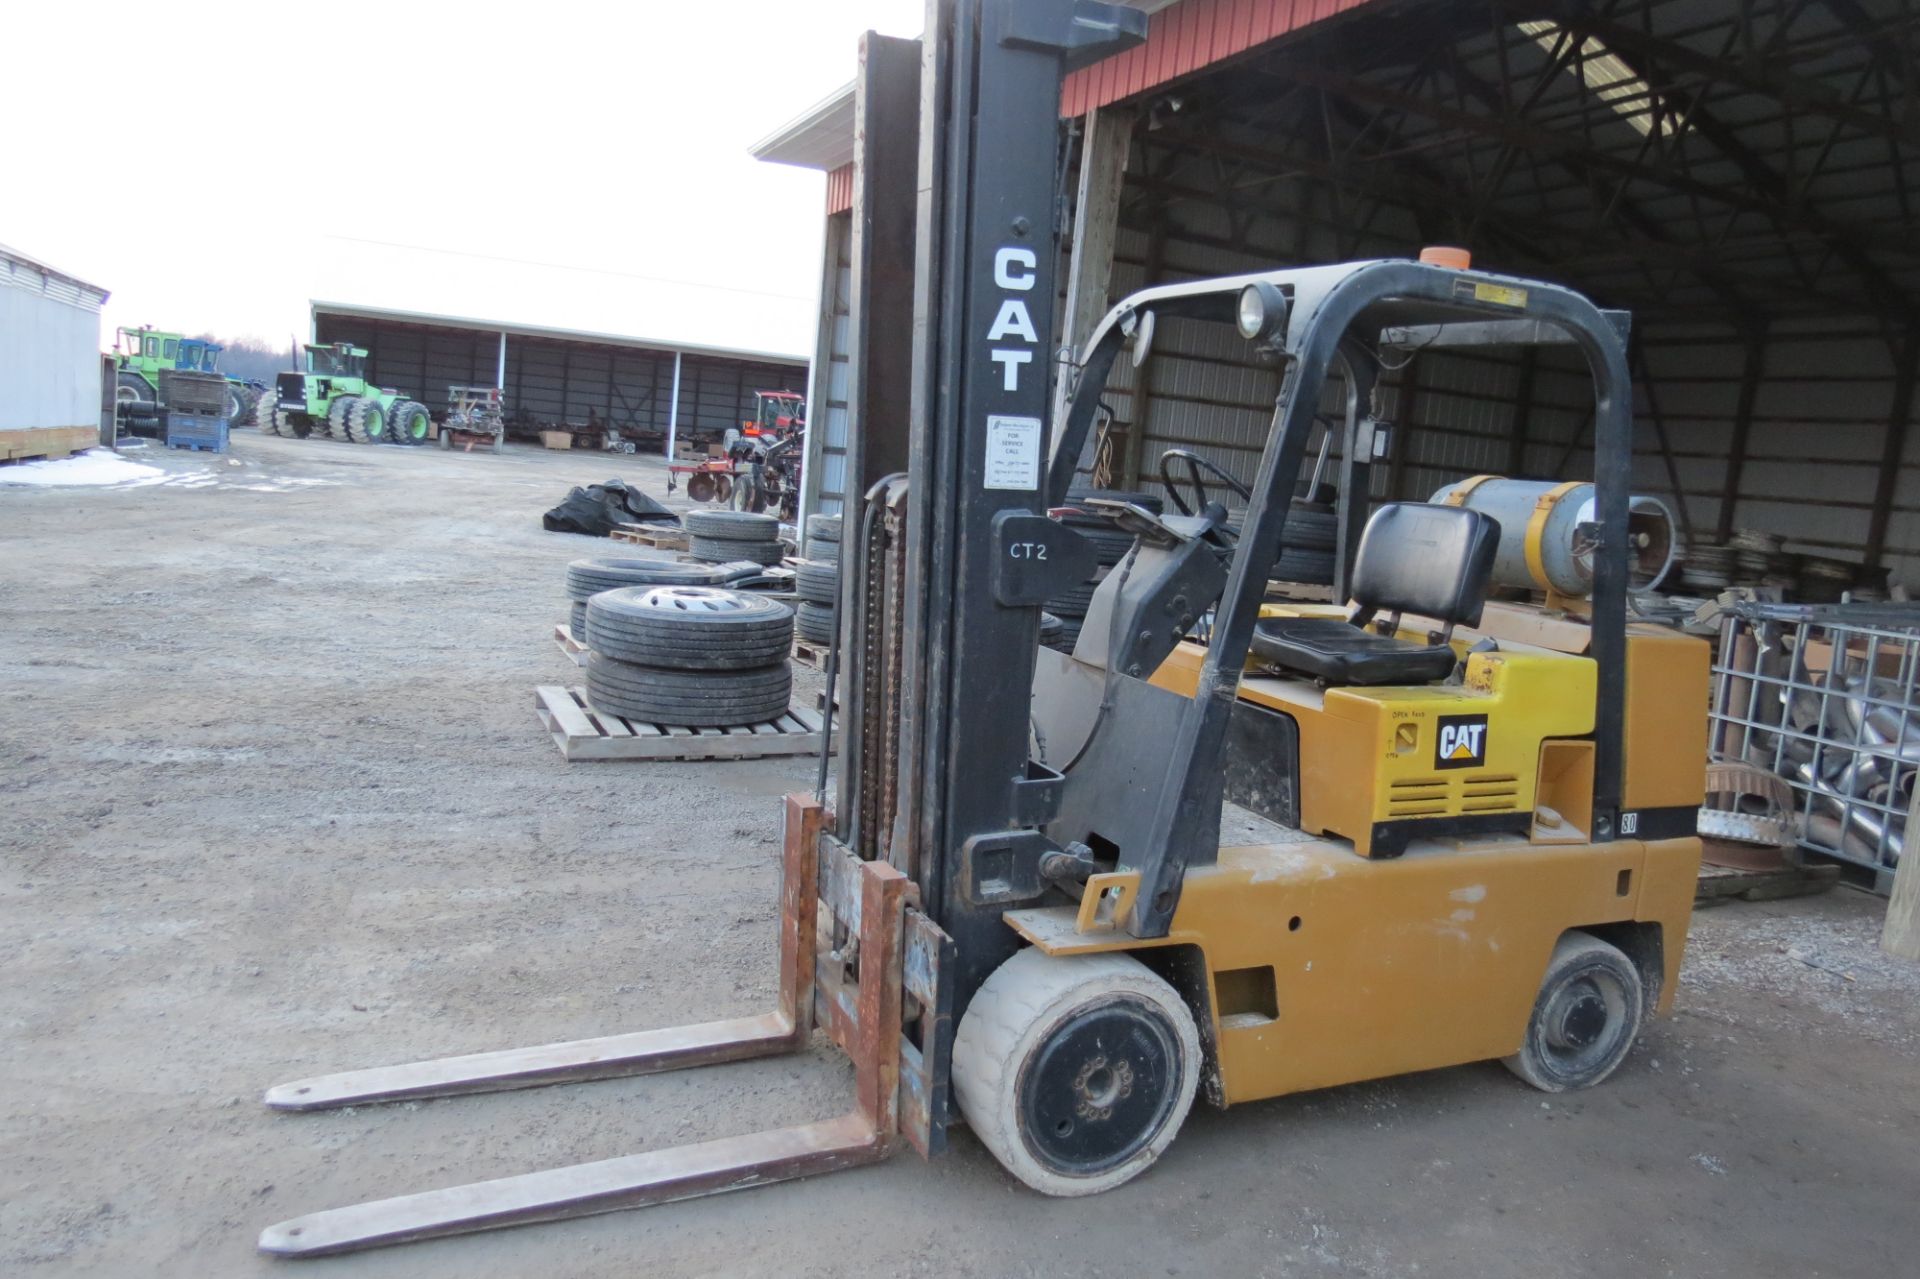 Cat GC25 forklift, 5000 lb cap, 3 stage mast, solid tires, LP, sideshift, sells with LP tank